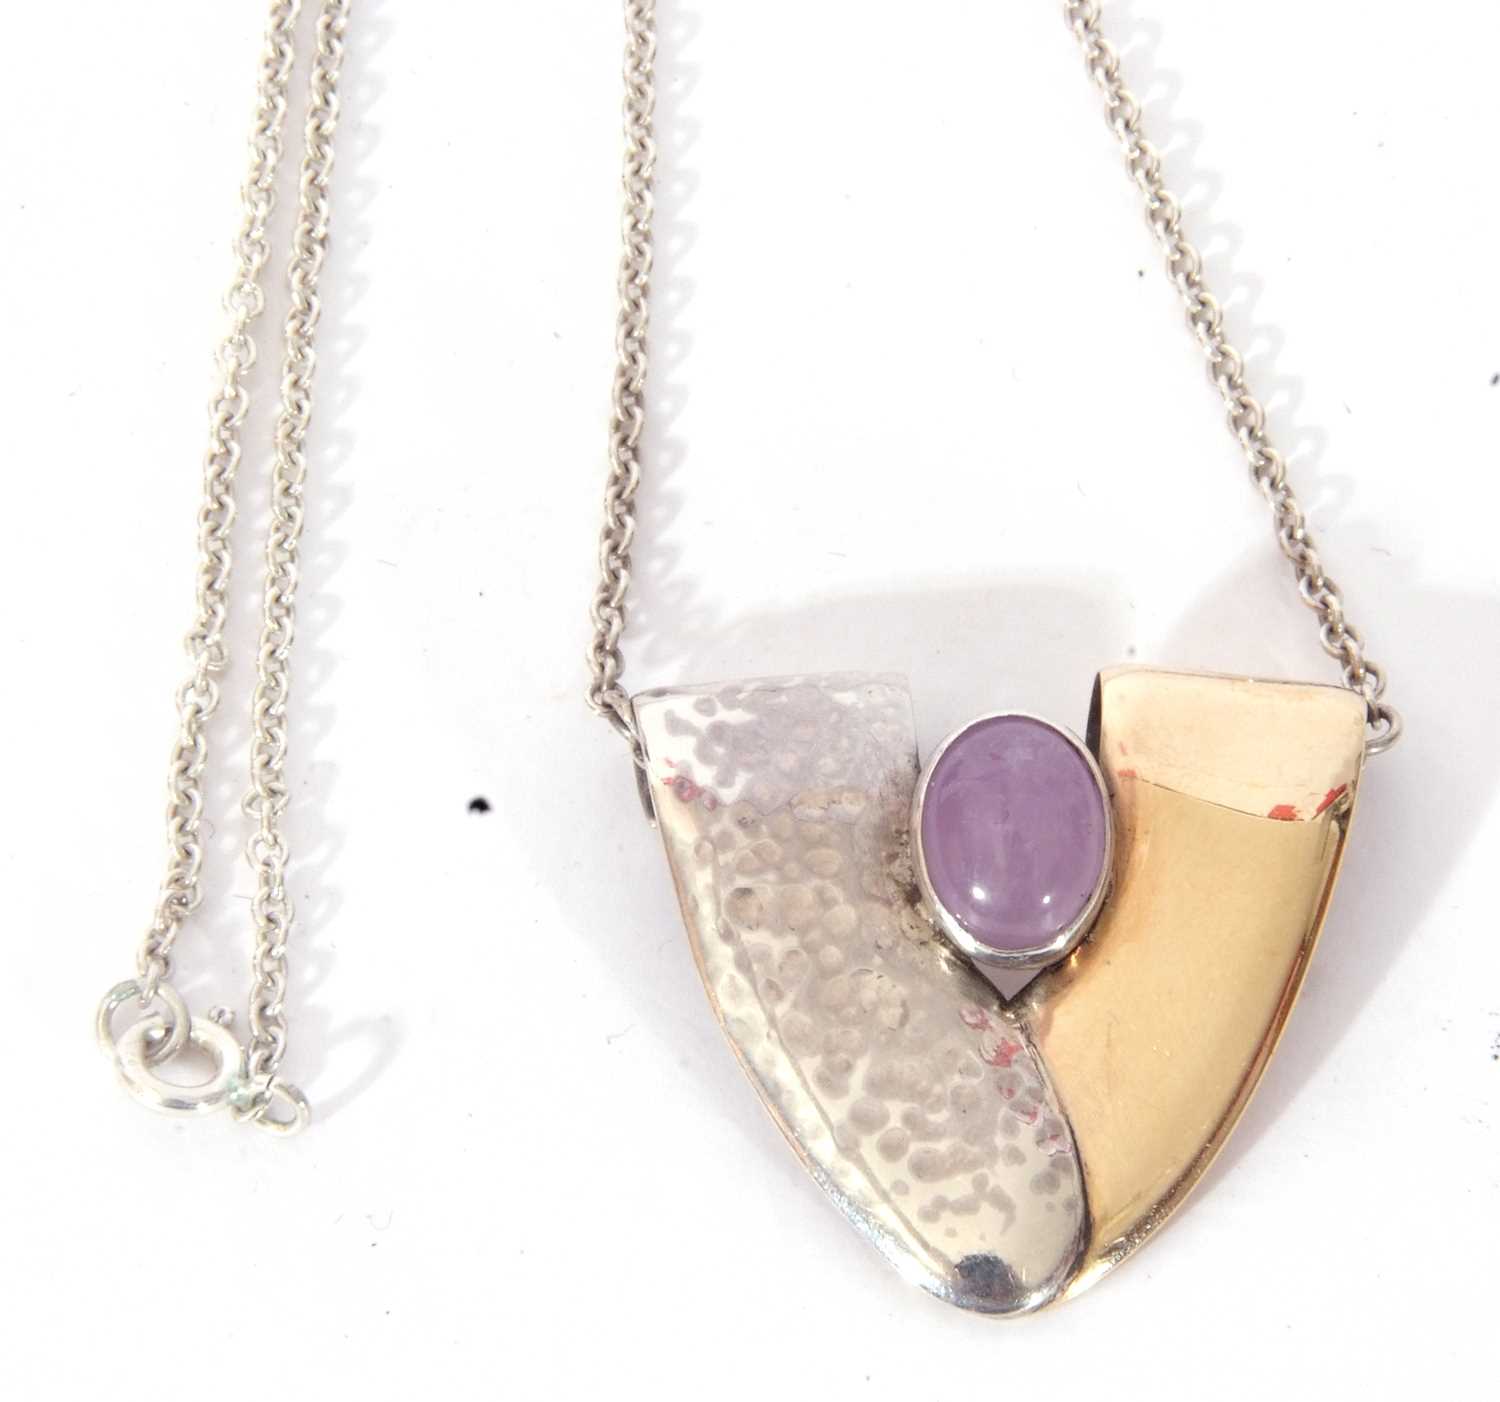 Modern designer amethyst pendant and chain centring an oval cabochon amethyst between two-tone plain - Image 3 of 4